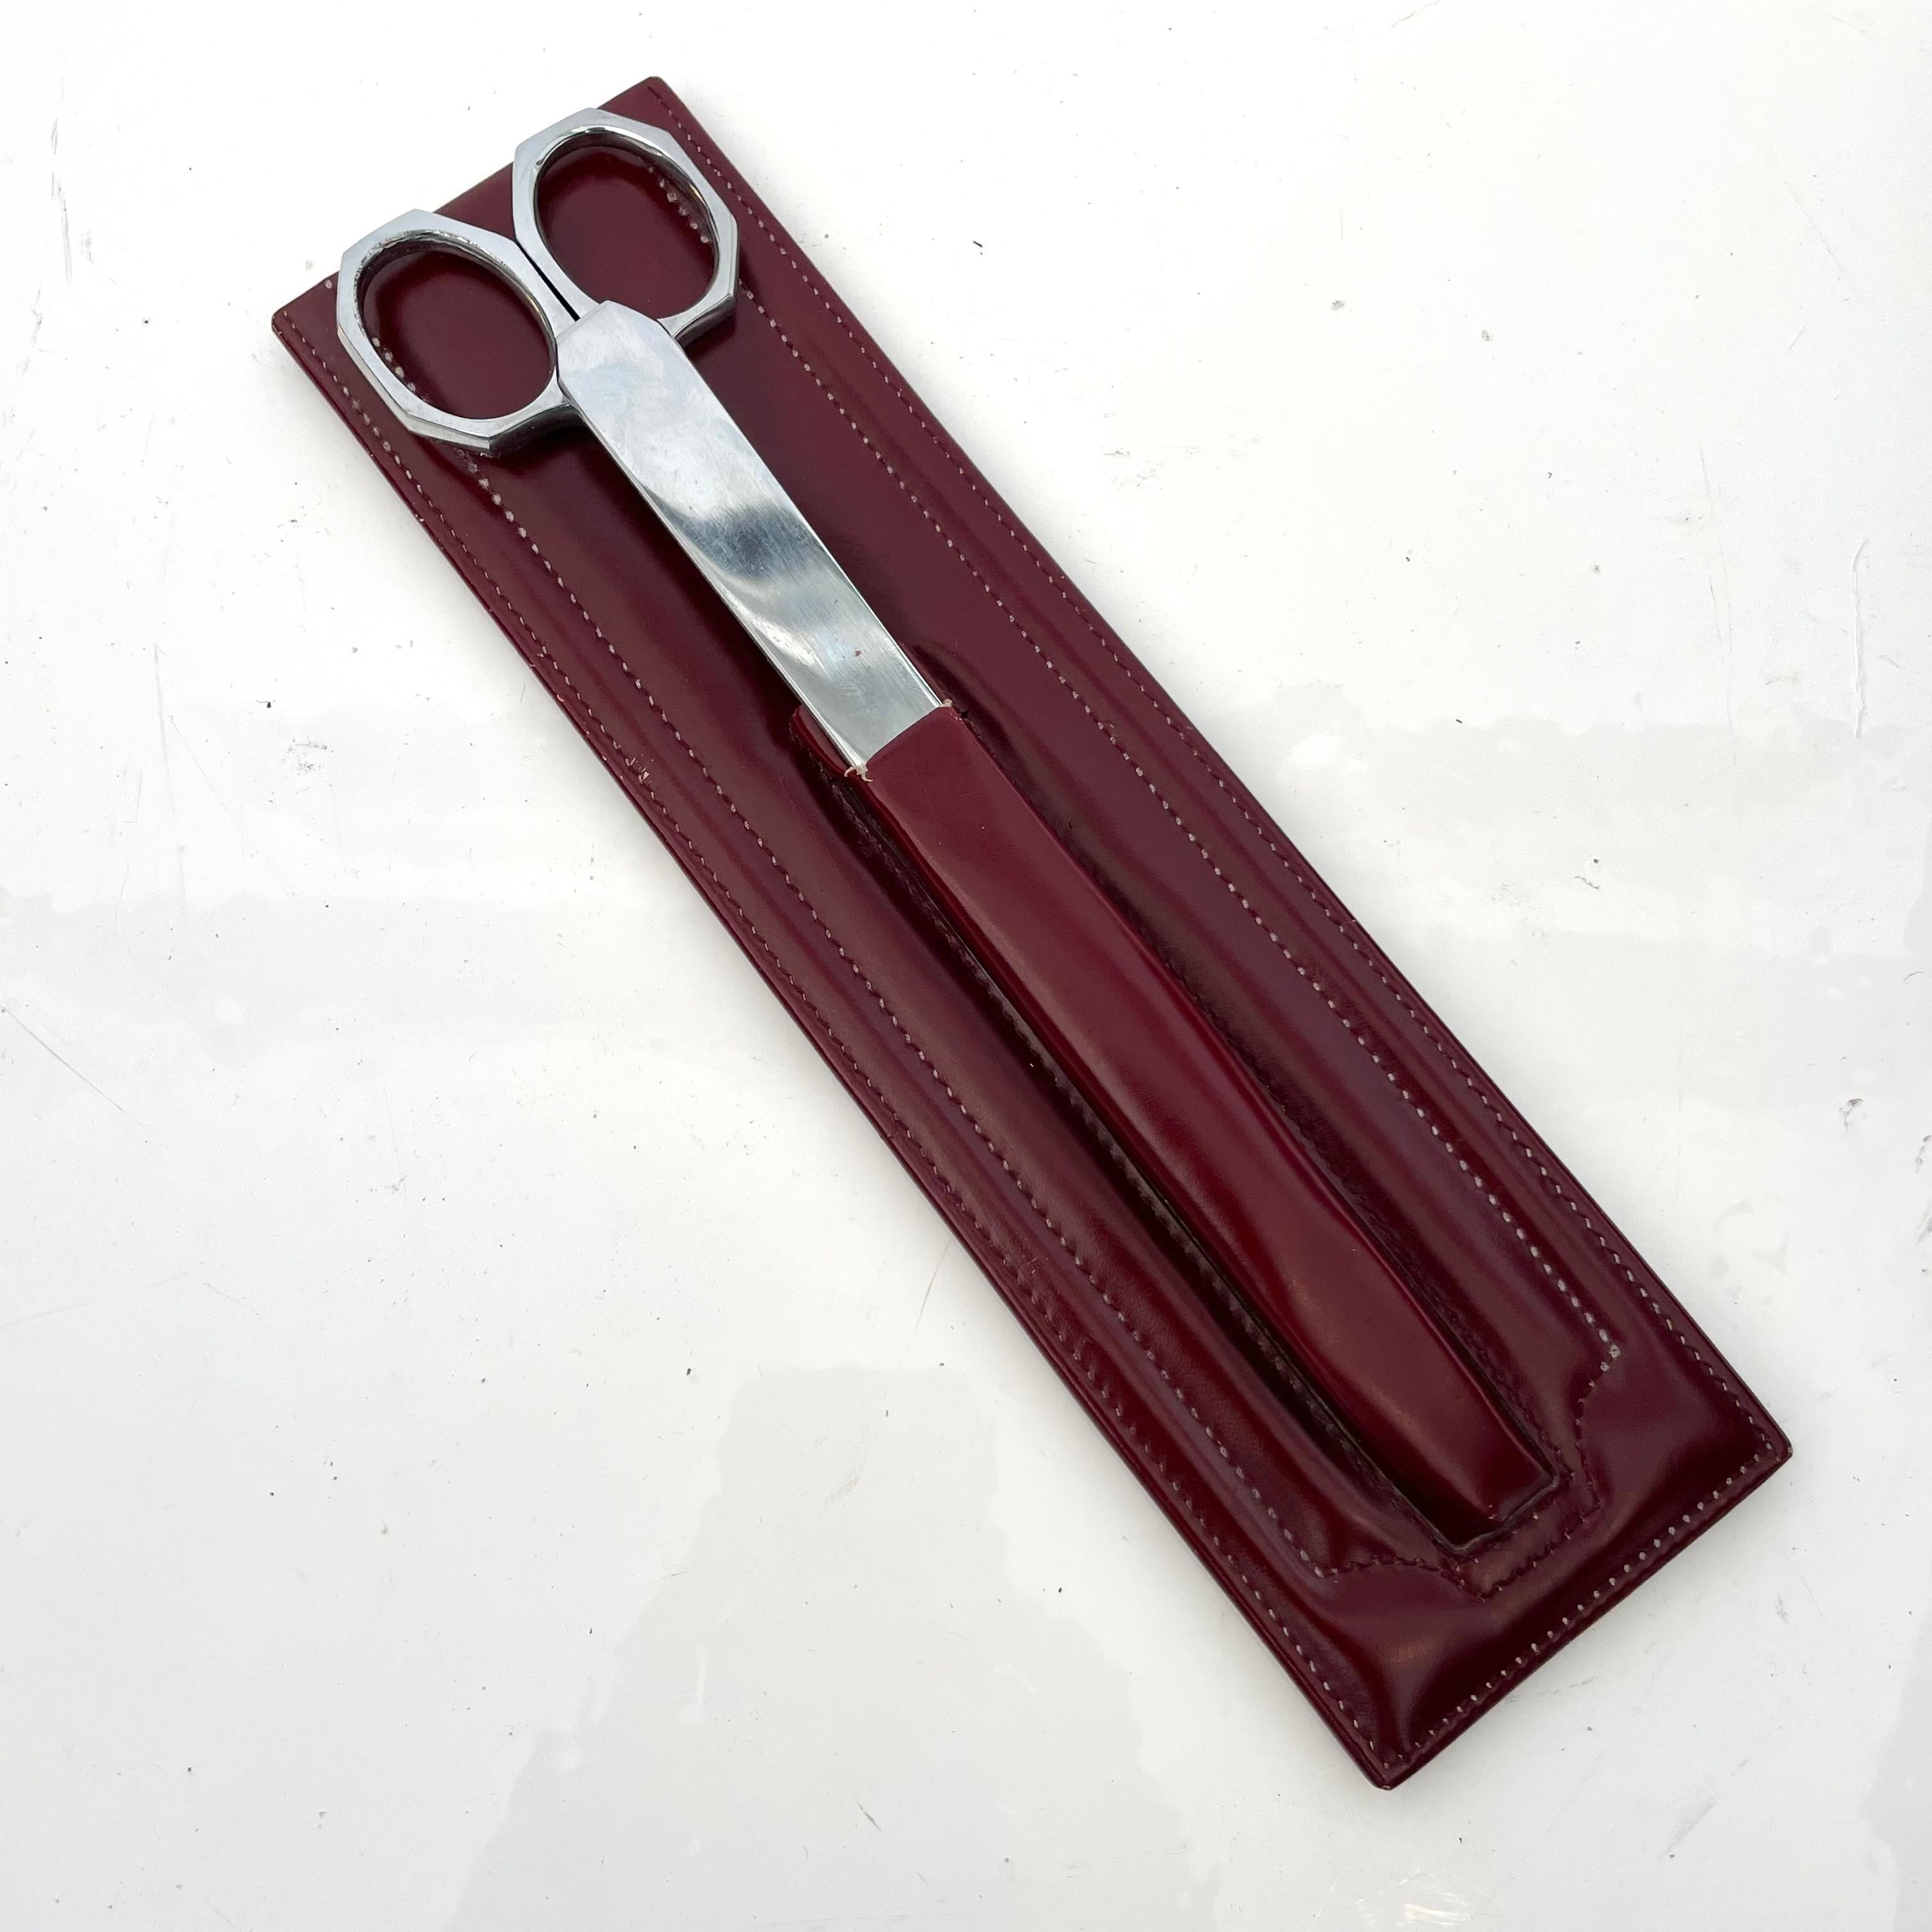 Classic leather desk set with chrome letter opener and scissors. Burgundy leather holding case. Marked made in France and Nogent. Good vintage condition to metal and leather.